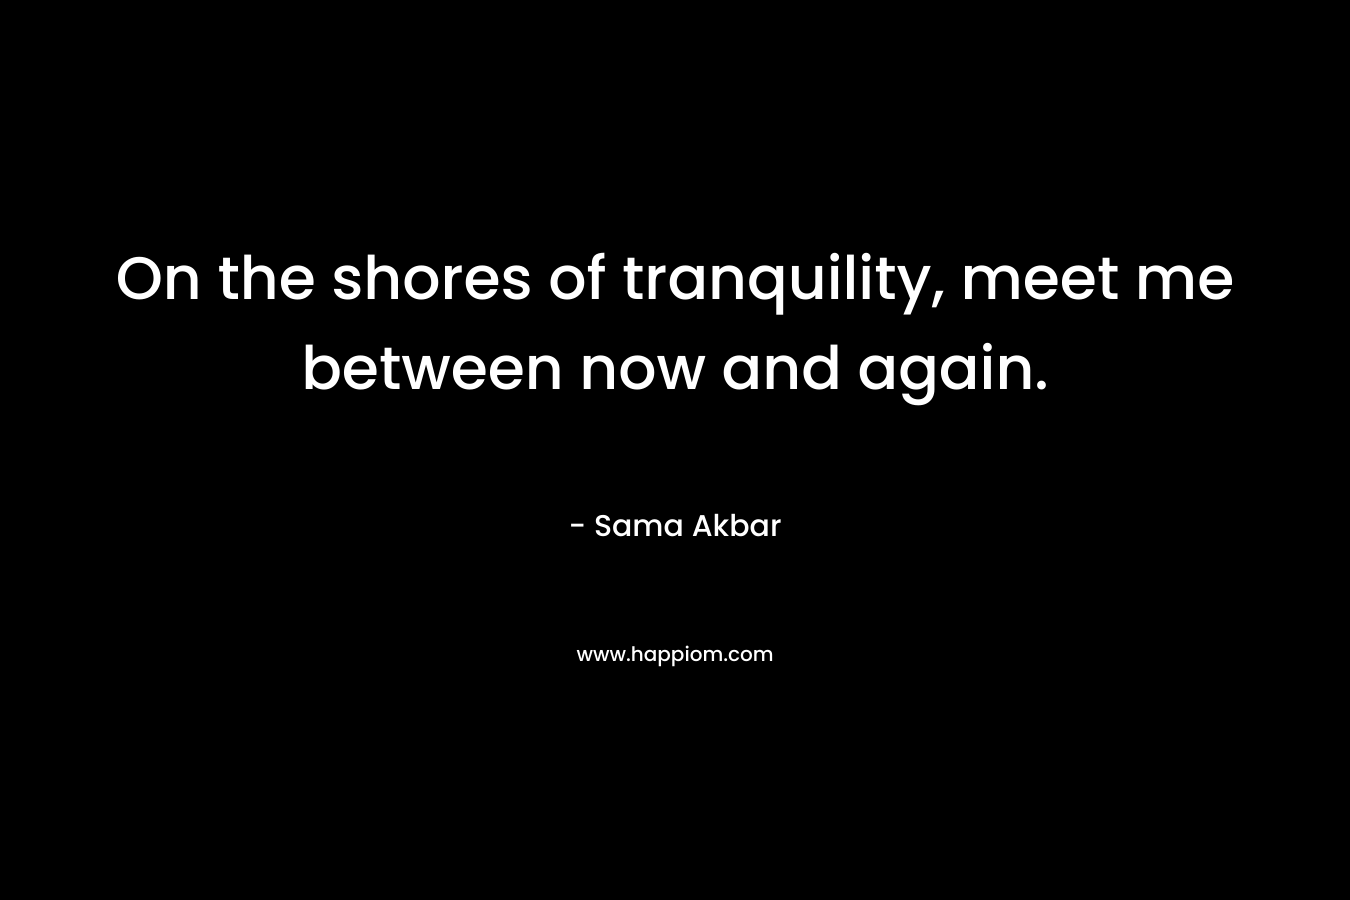 On the shores of tranquility, meet me between now and again. – Sama Akbar